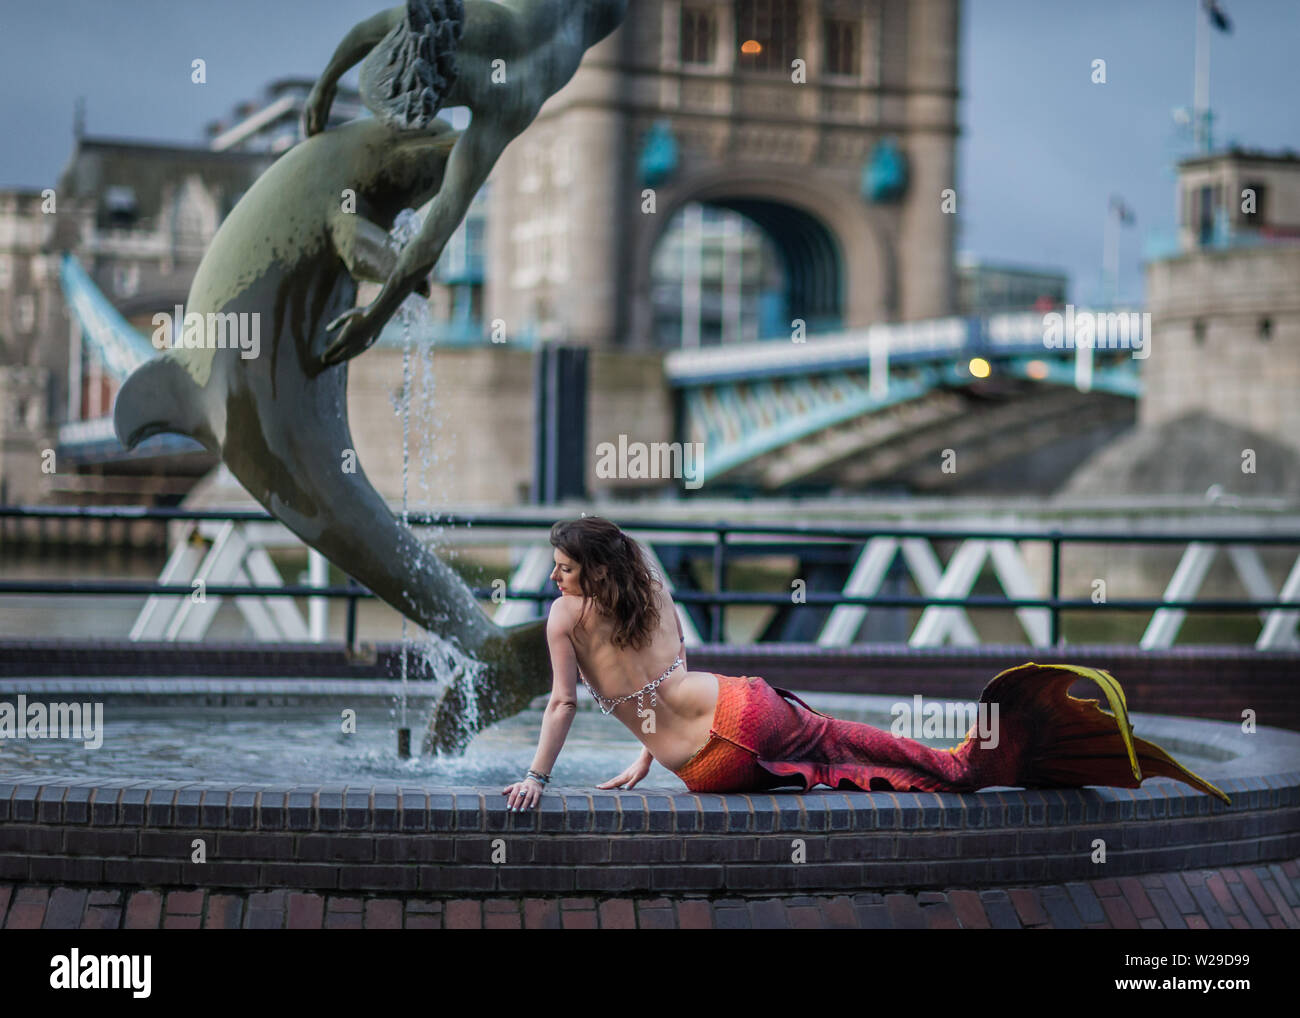 A mermaid poses by the Girl and Dolphin by Tower Bridge in London England. 1 Stock Photo